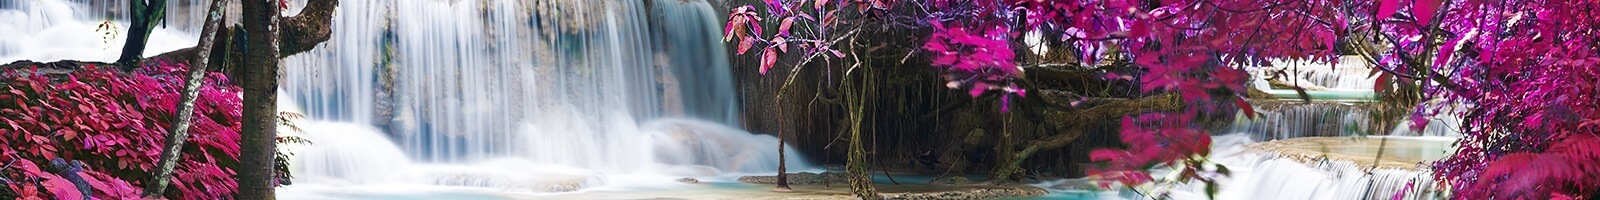 Purple flowers surrounding waterfall to demonstrate the easy and comfortable way to detox: The Coleman Method